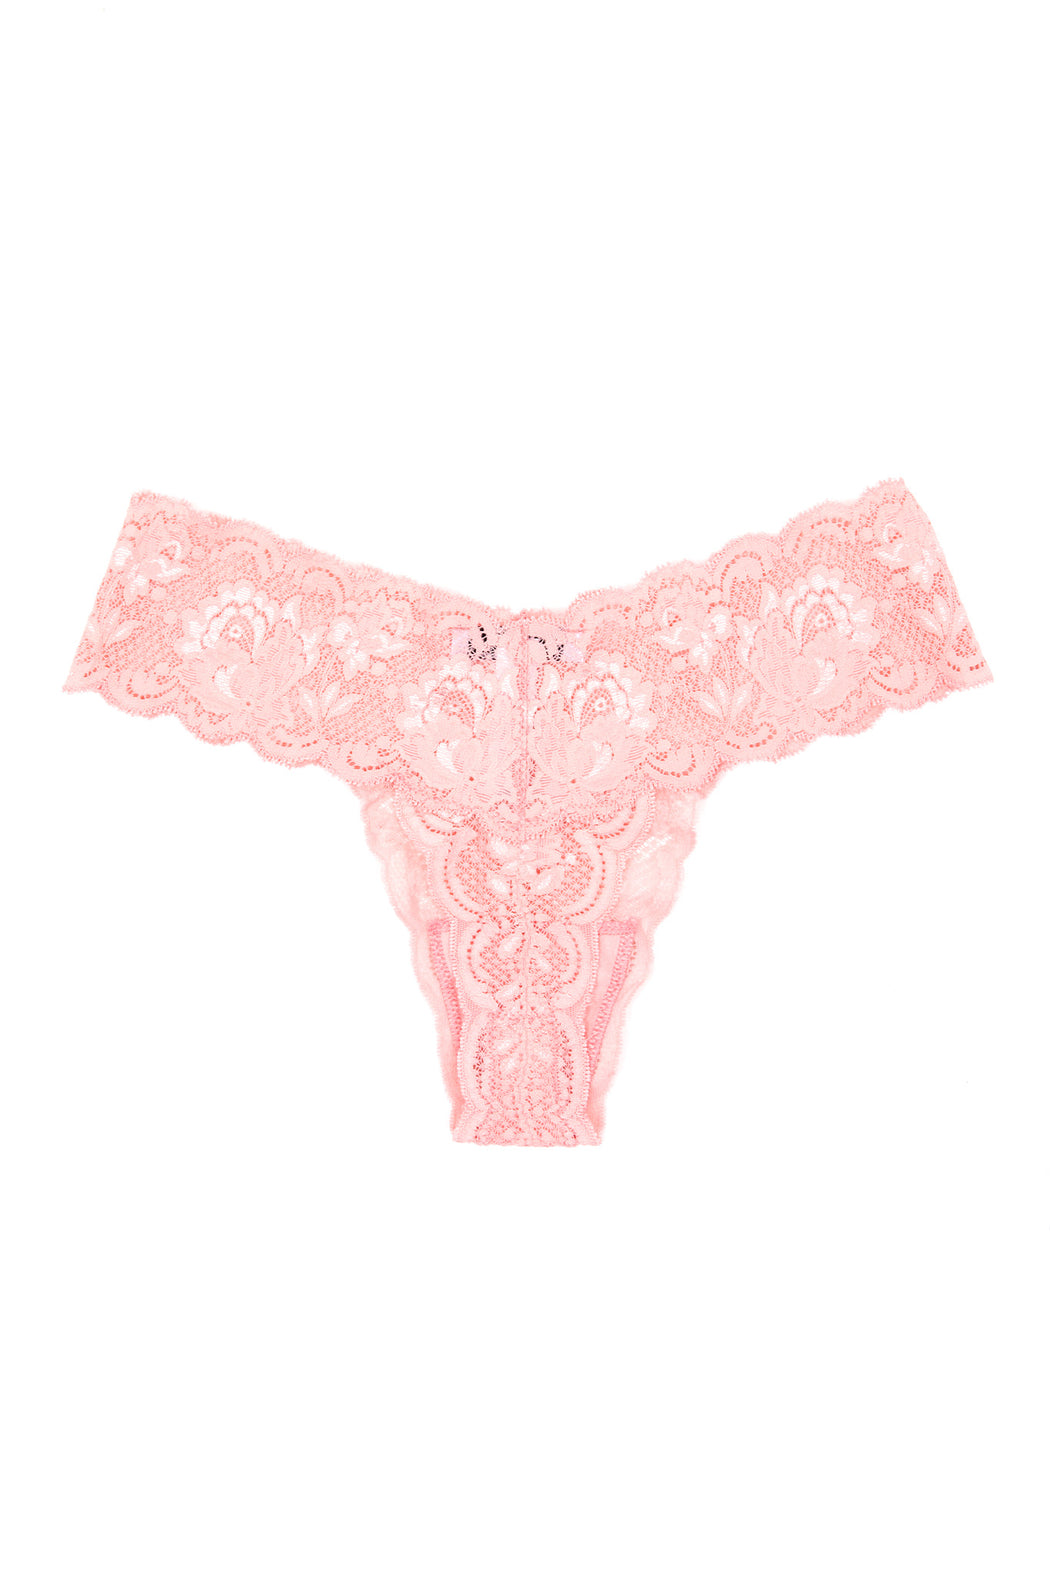 Cosabella-Never-Say-Never-Cutie-Low-Rise-Thong-Jaipur-Pink